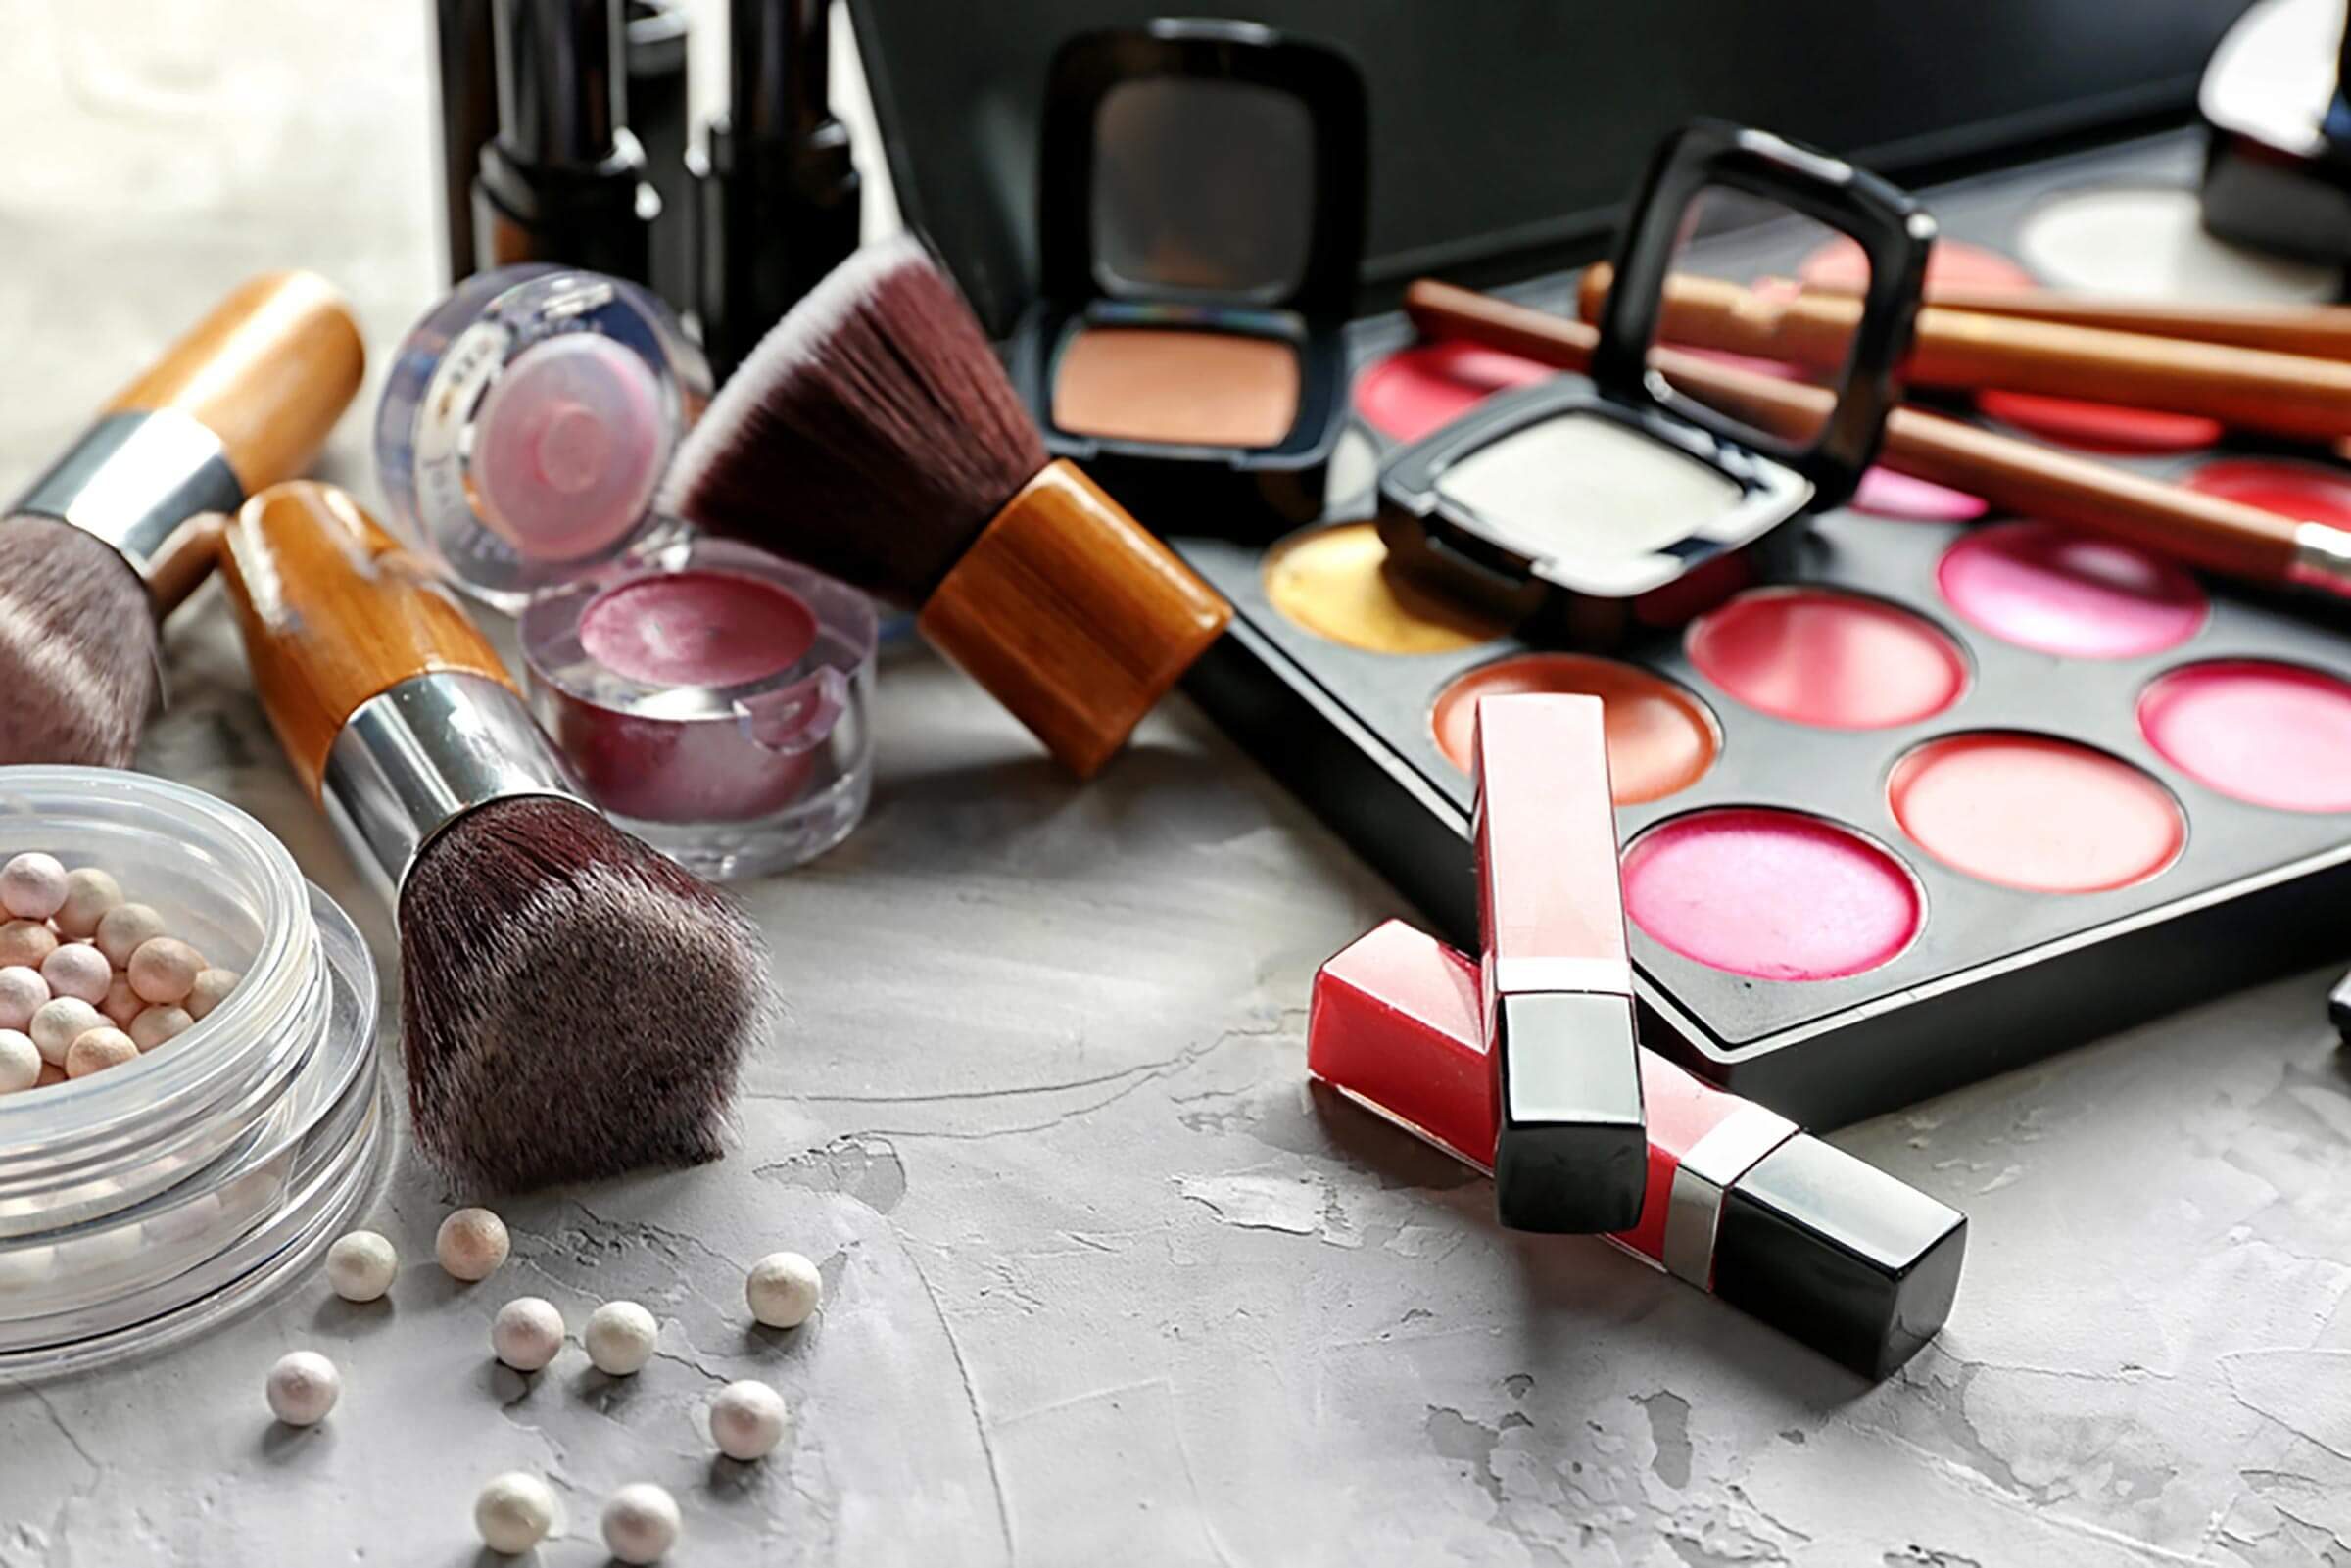 A makeup set, including blushes, lip glosses, and brushes, on a marble counter.